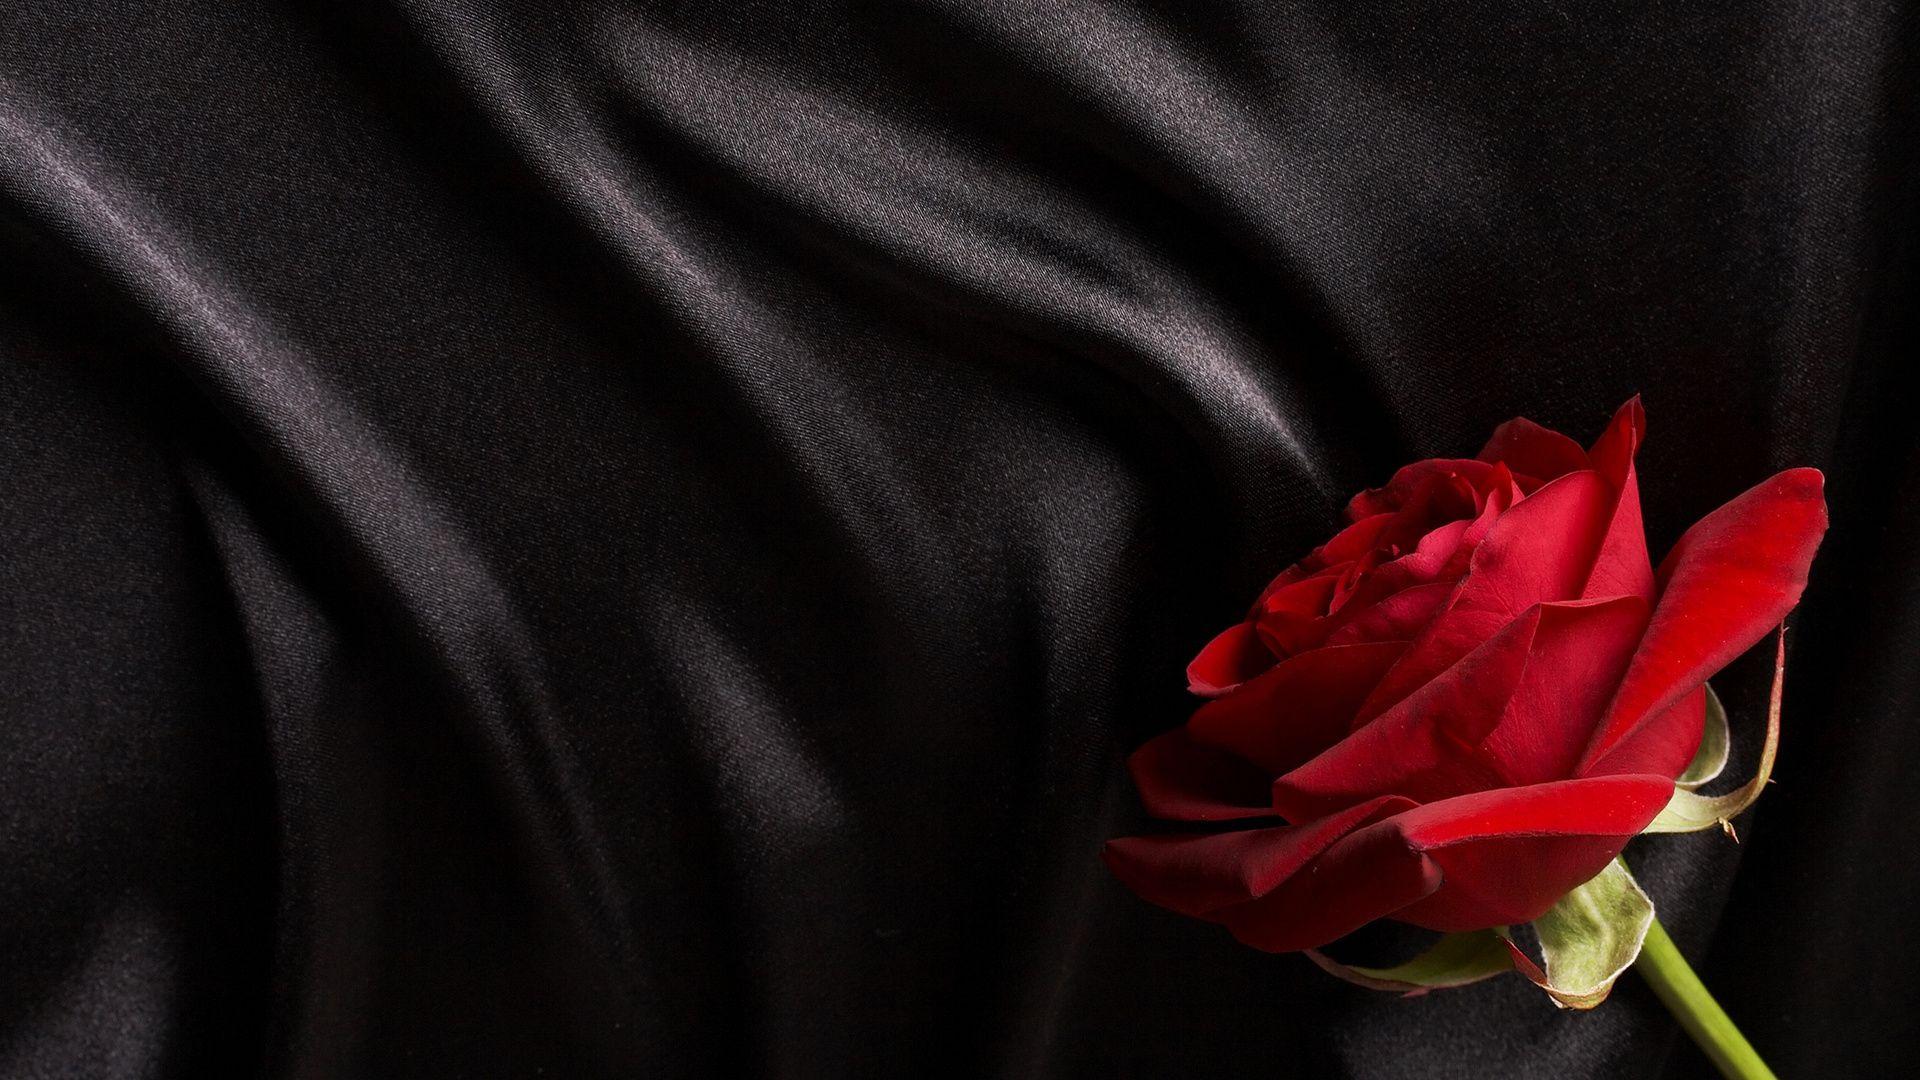 Black And Red Rose Wallpapers Top Free Black And Red Rose Backgrounds Wallpaperaccess